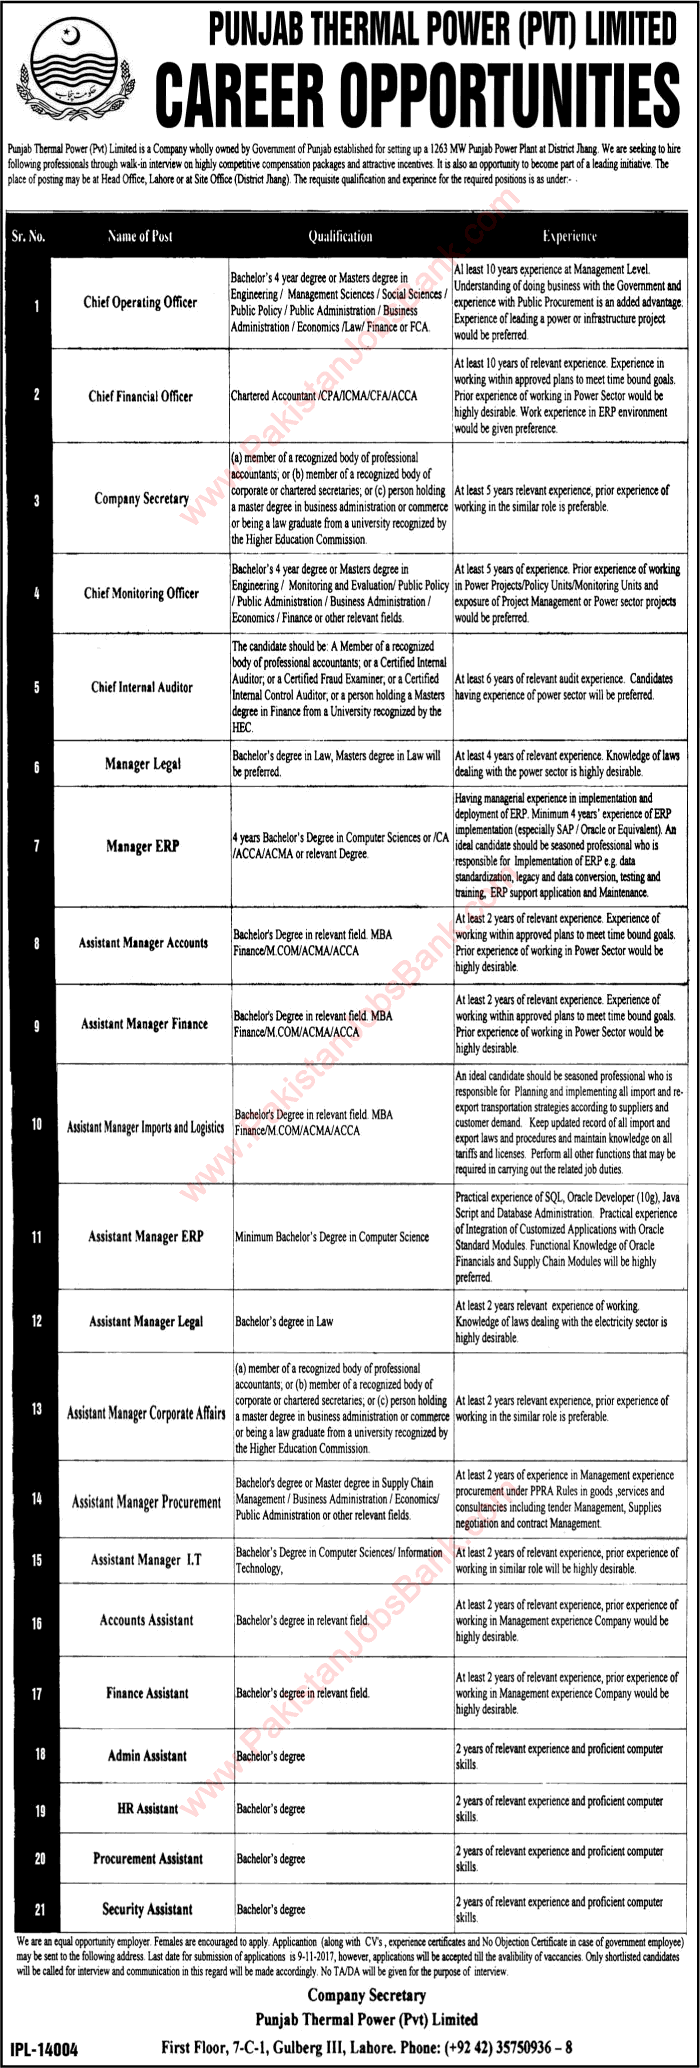 Punjab Thermal Power Pvt Ltd Jobs October 2017 Walk in Interview Accounts / Admin Assistants, Managers & Others Latest